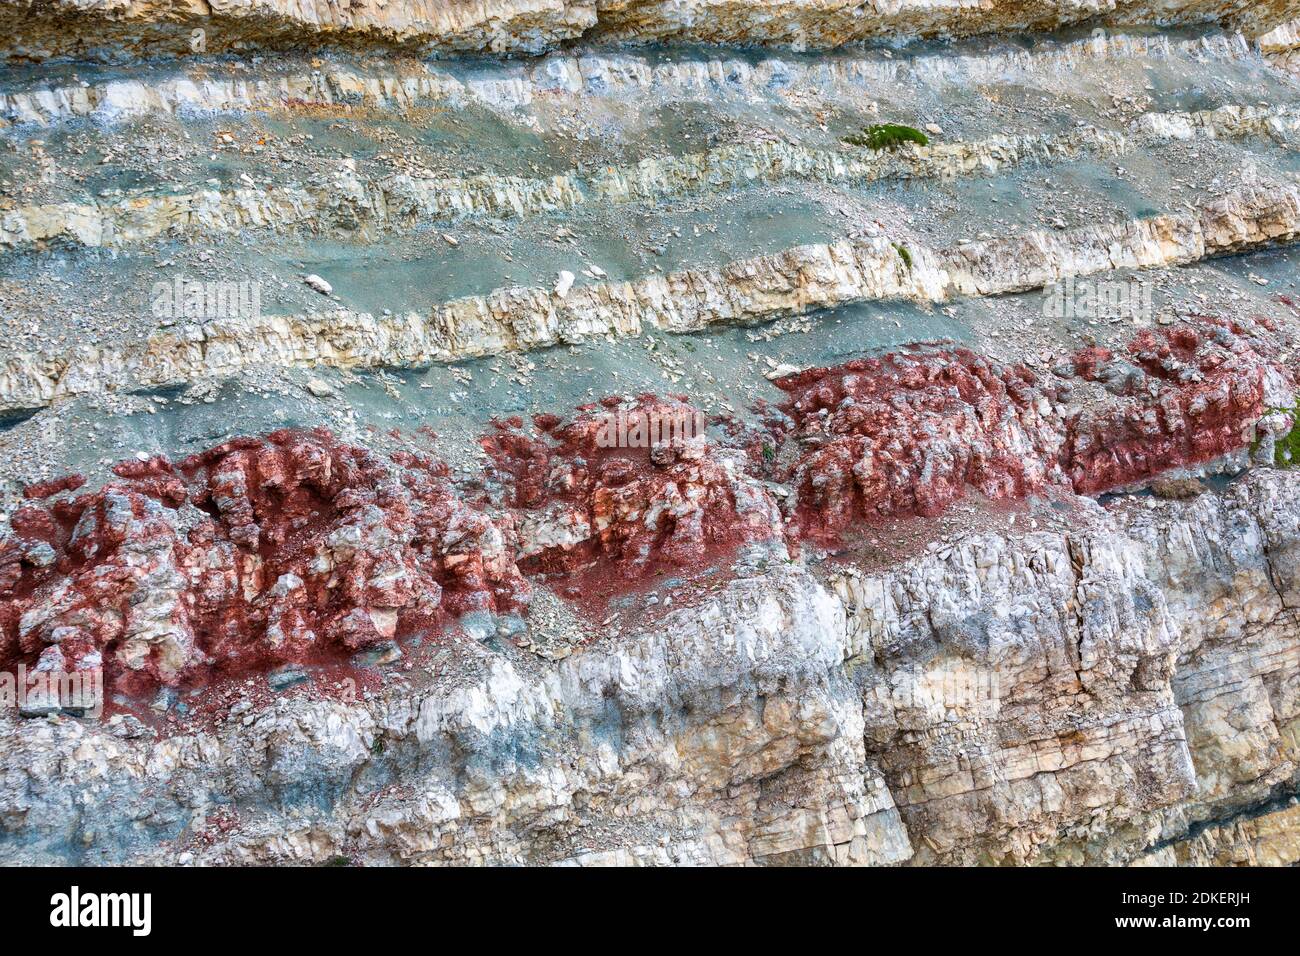 Close up detail on the rocks at the foots of Tofana di Rozes, Travenanzes formation, Dolomites, Cortina d'Ampezzo, Belluno, Veneto, Italy Stock Photo